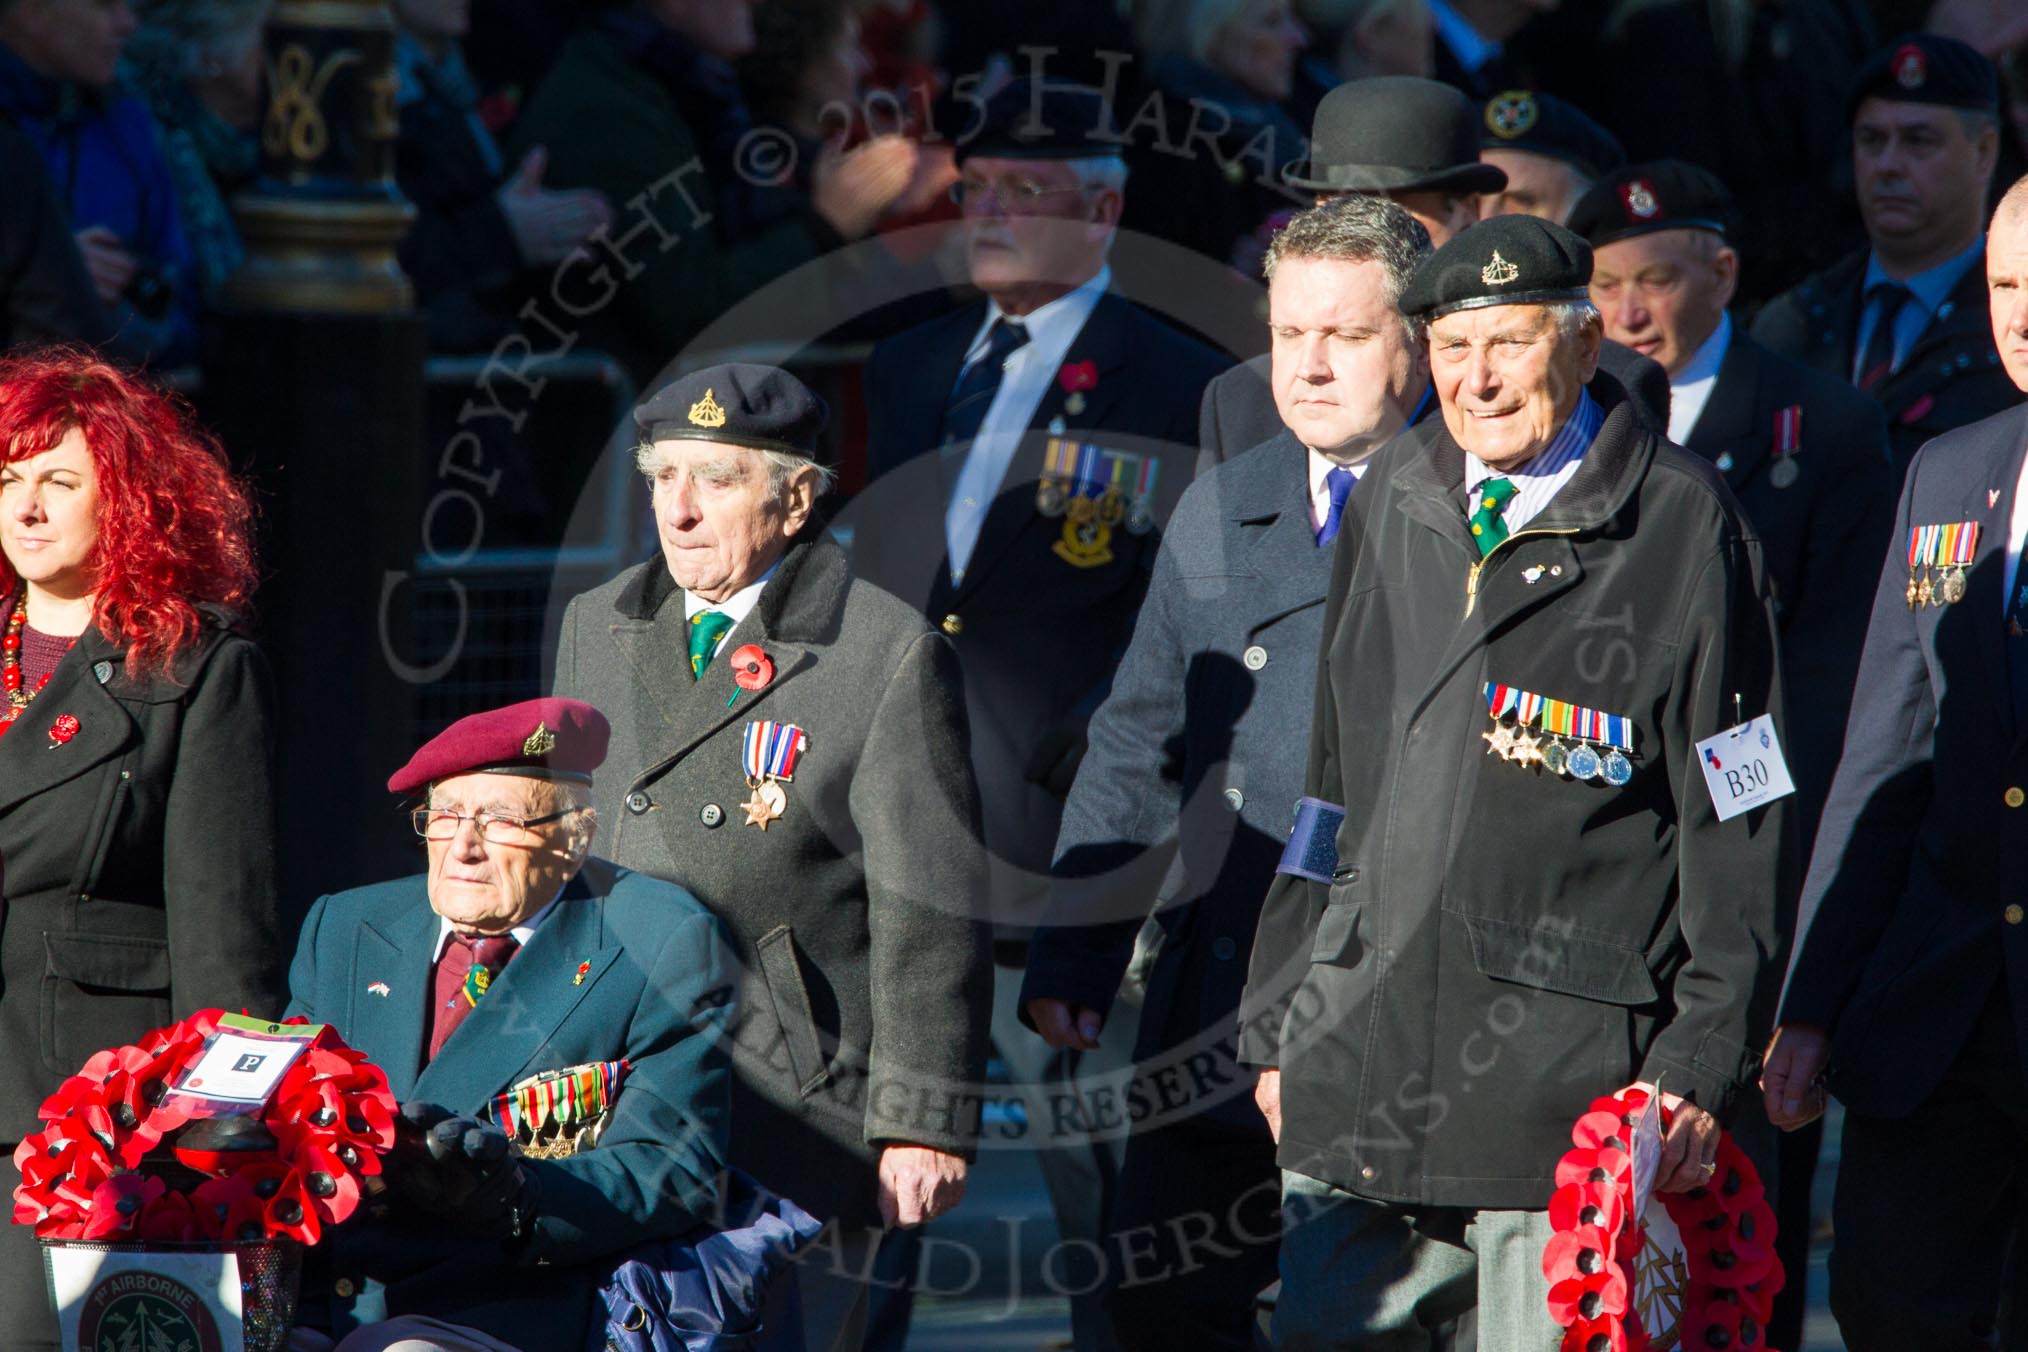 Remembrance Sunday Cenotaph March Past 2013: B30 - Reconnaissance Corps..
Press stand opposite the Foreign Office building, Whitehall, London SW1,
London,
Greater London,
United Kingdom,
on 10 November 2013 at 12:03, image #1567